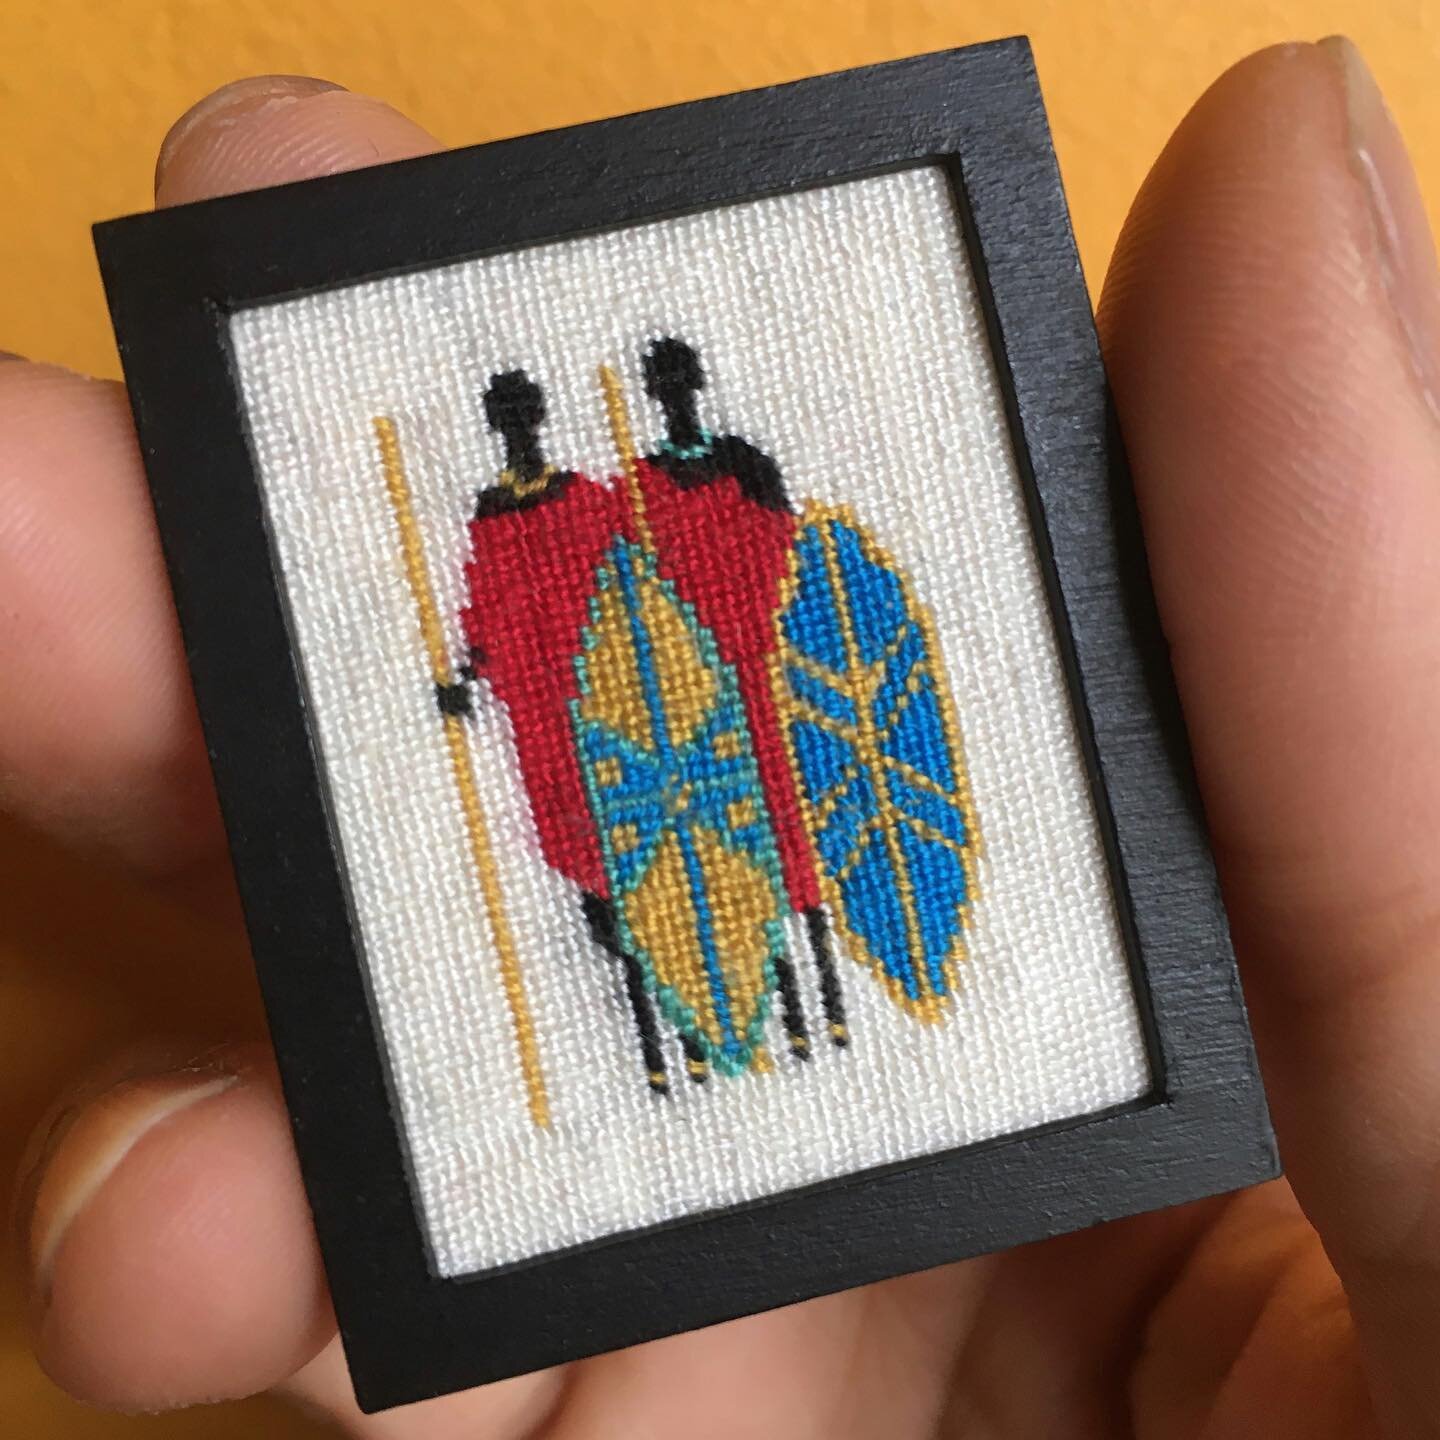 Maasai petit point piece is officially framed and complete. I like the black frame. Measures approximately 36mm (1.4&rdquo;) wide by 44mm (1.7&rdquo;) high. Petit point project number 2 is underway. 😉

#petiteafrique
*
*
*
*
*
*
#dollhouseminiatures